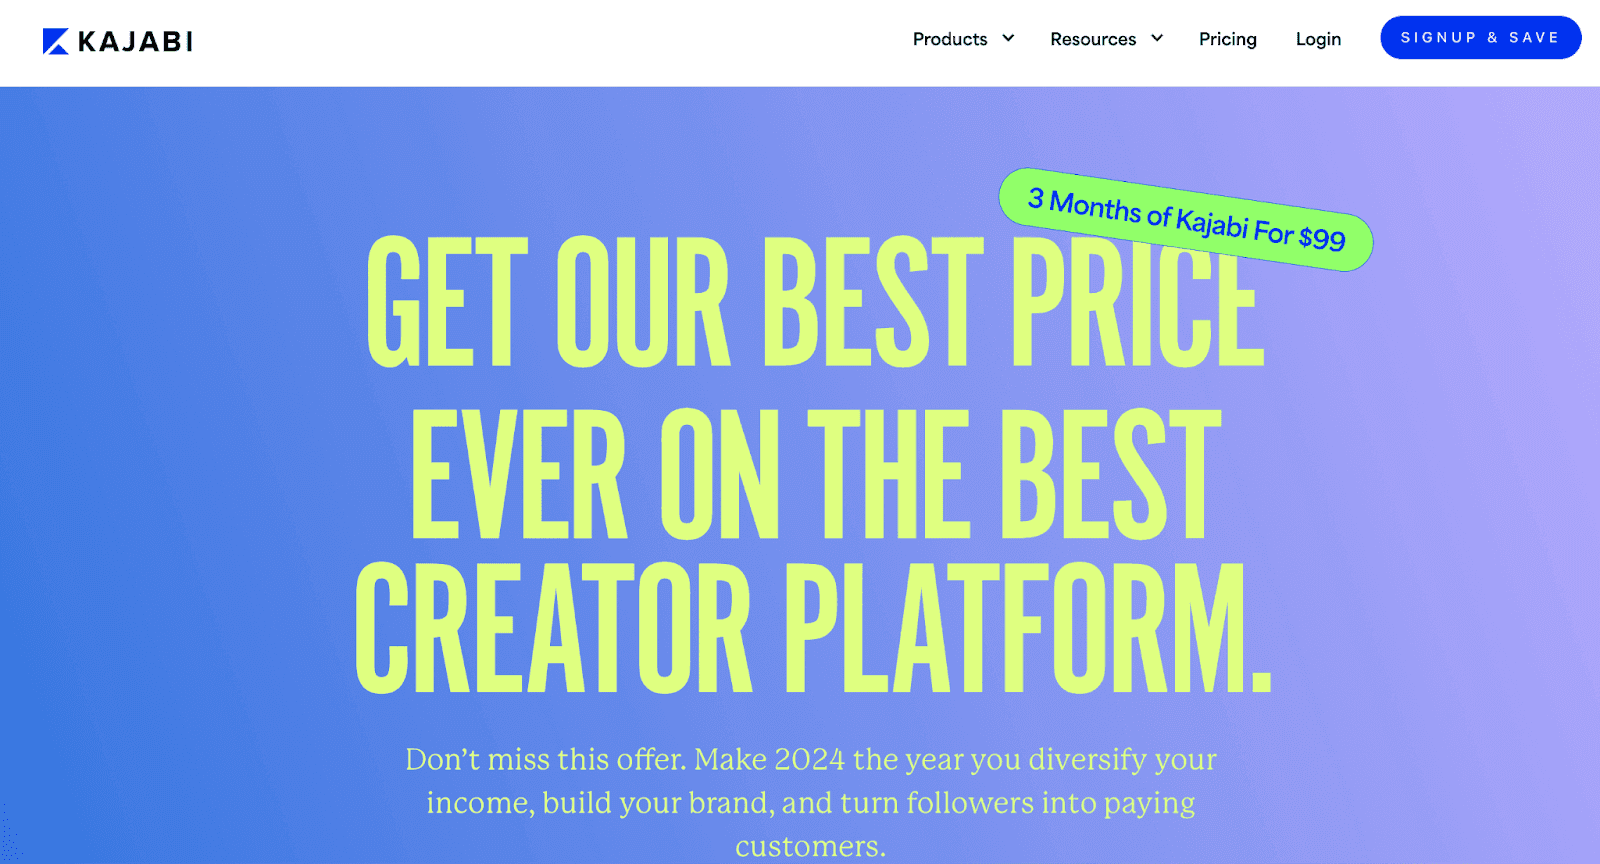 Get our best price ever on the best creator platform